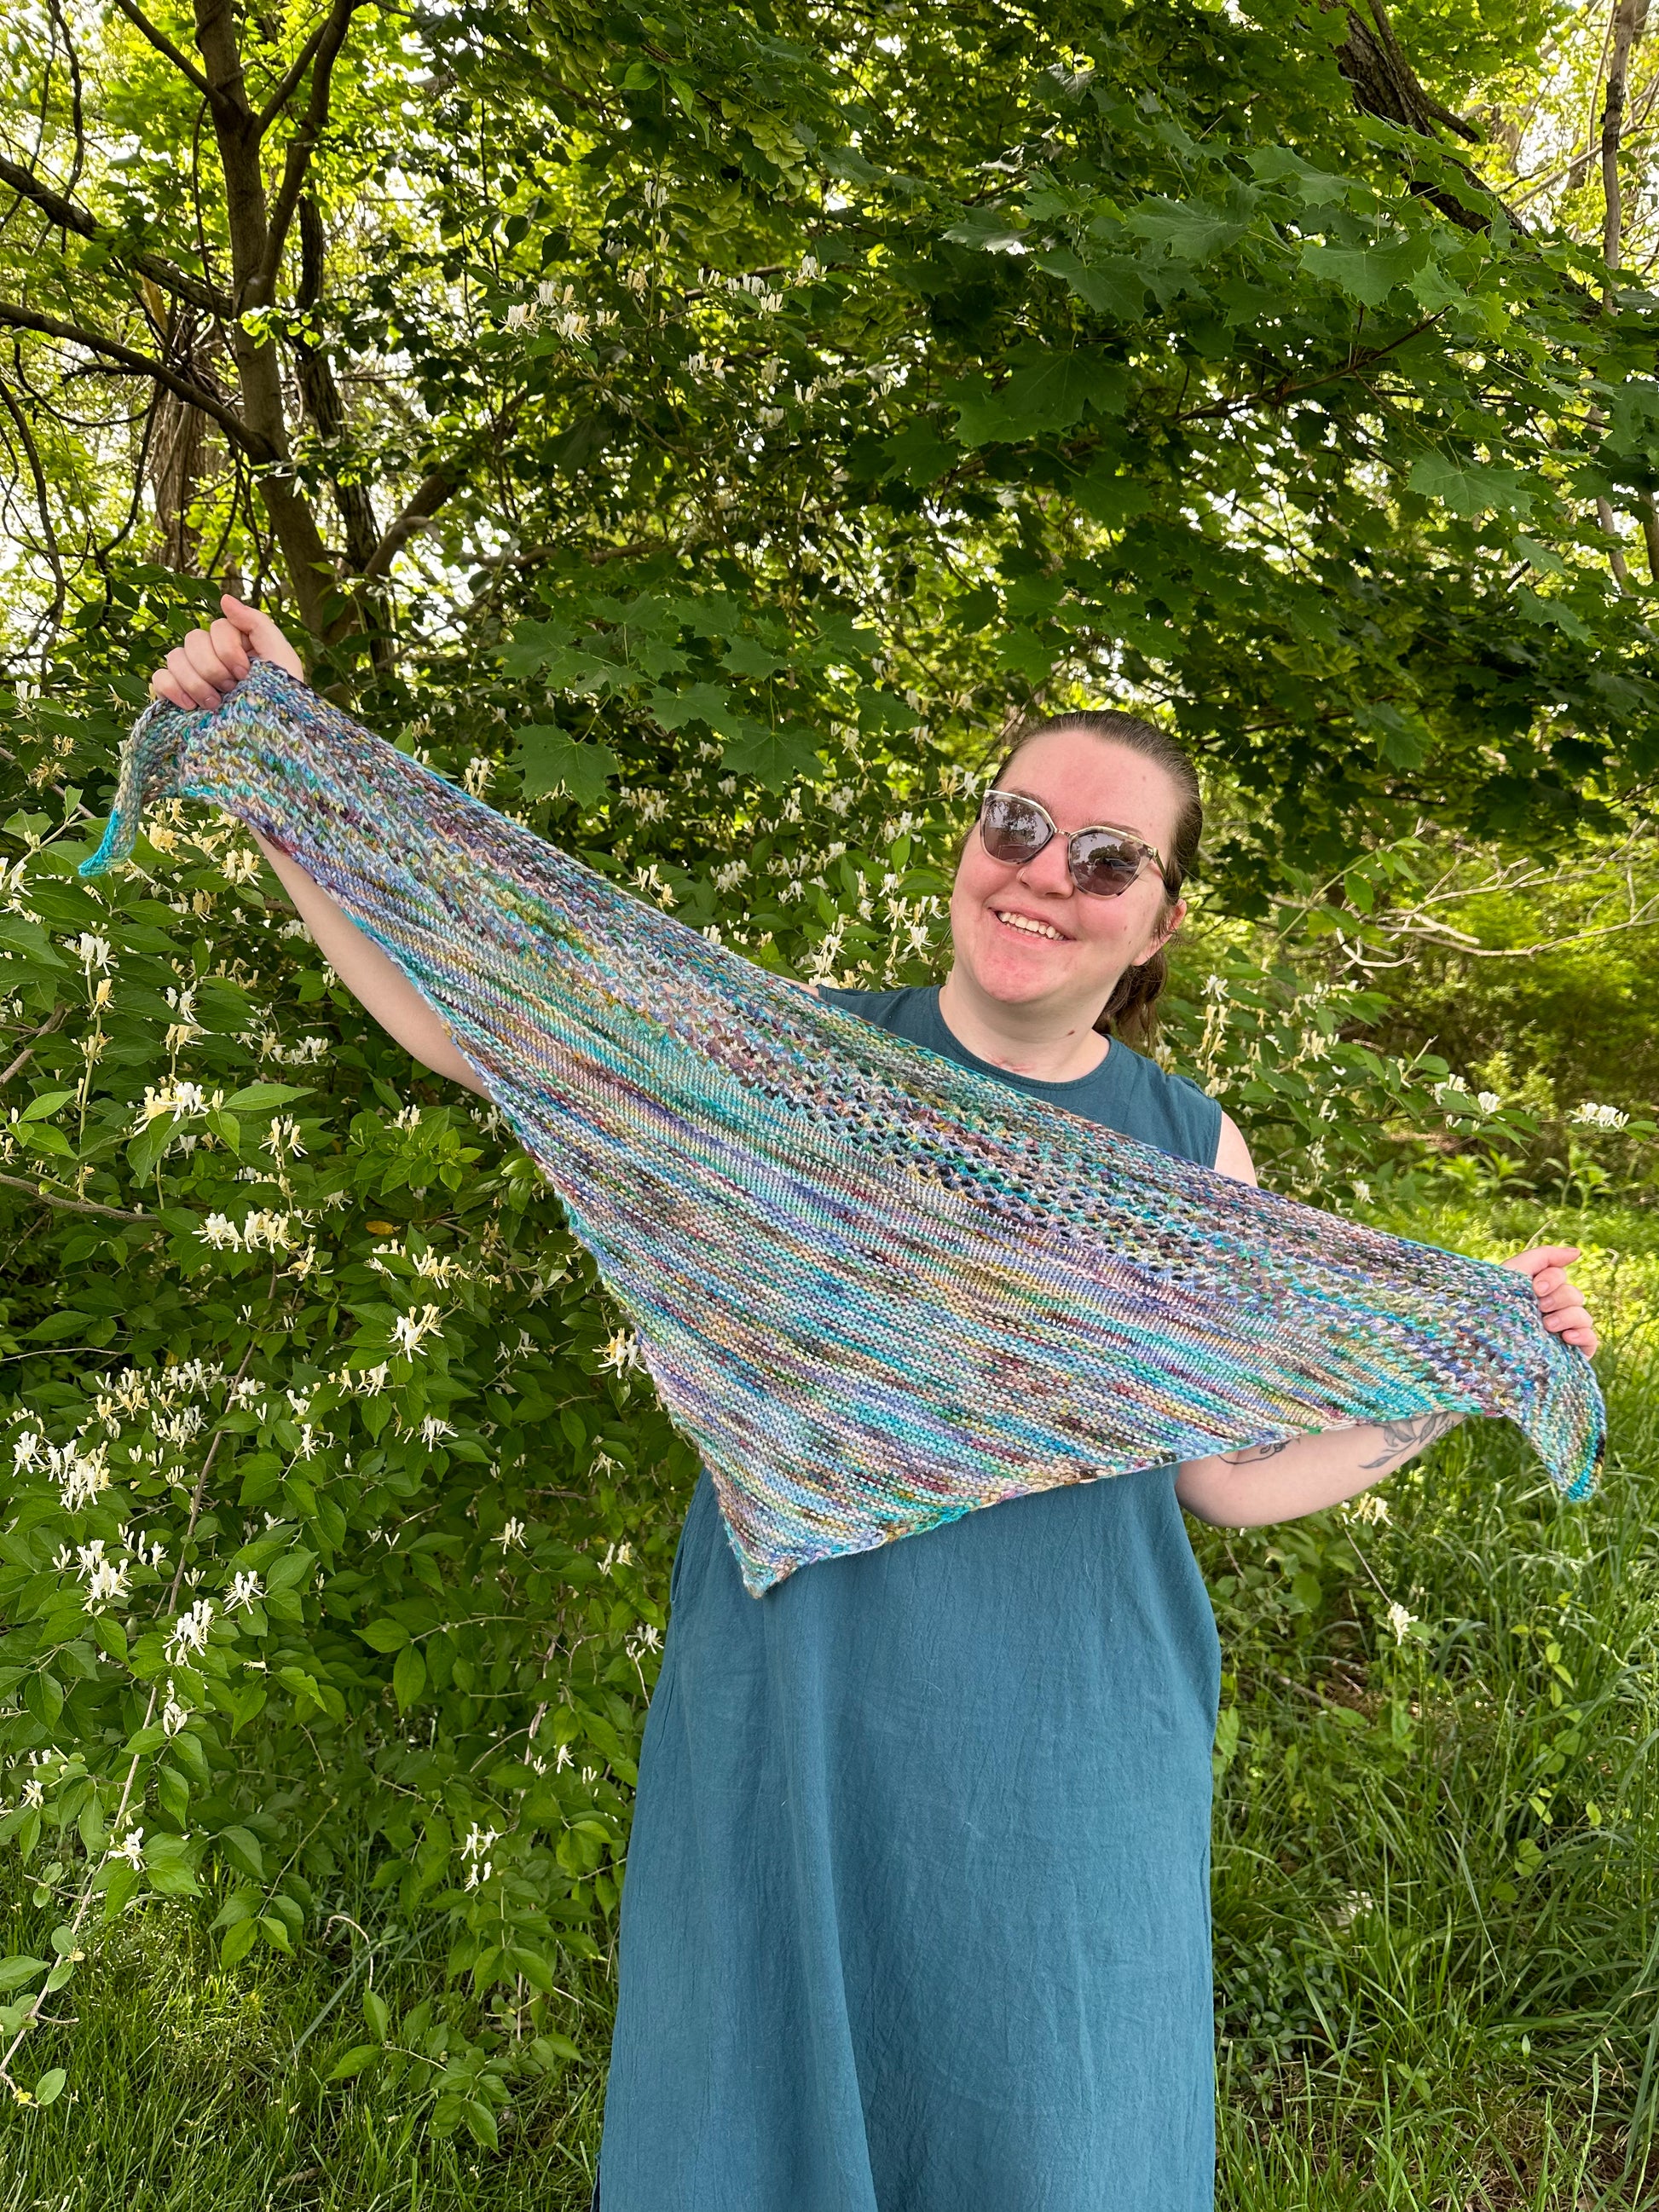 Cat stretches the Gradual Beginner Shawl out, showing its approximately 4-foot wingspan.